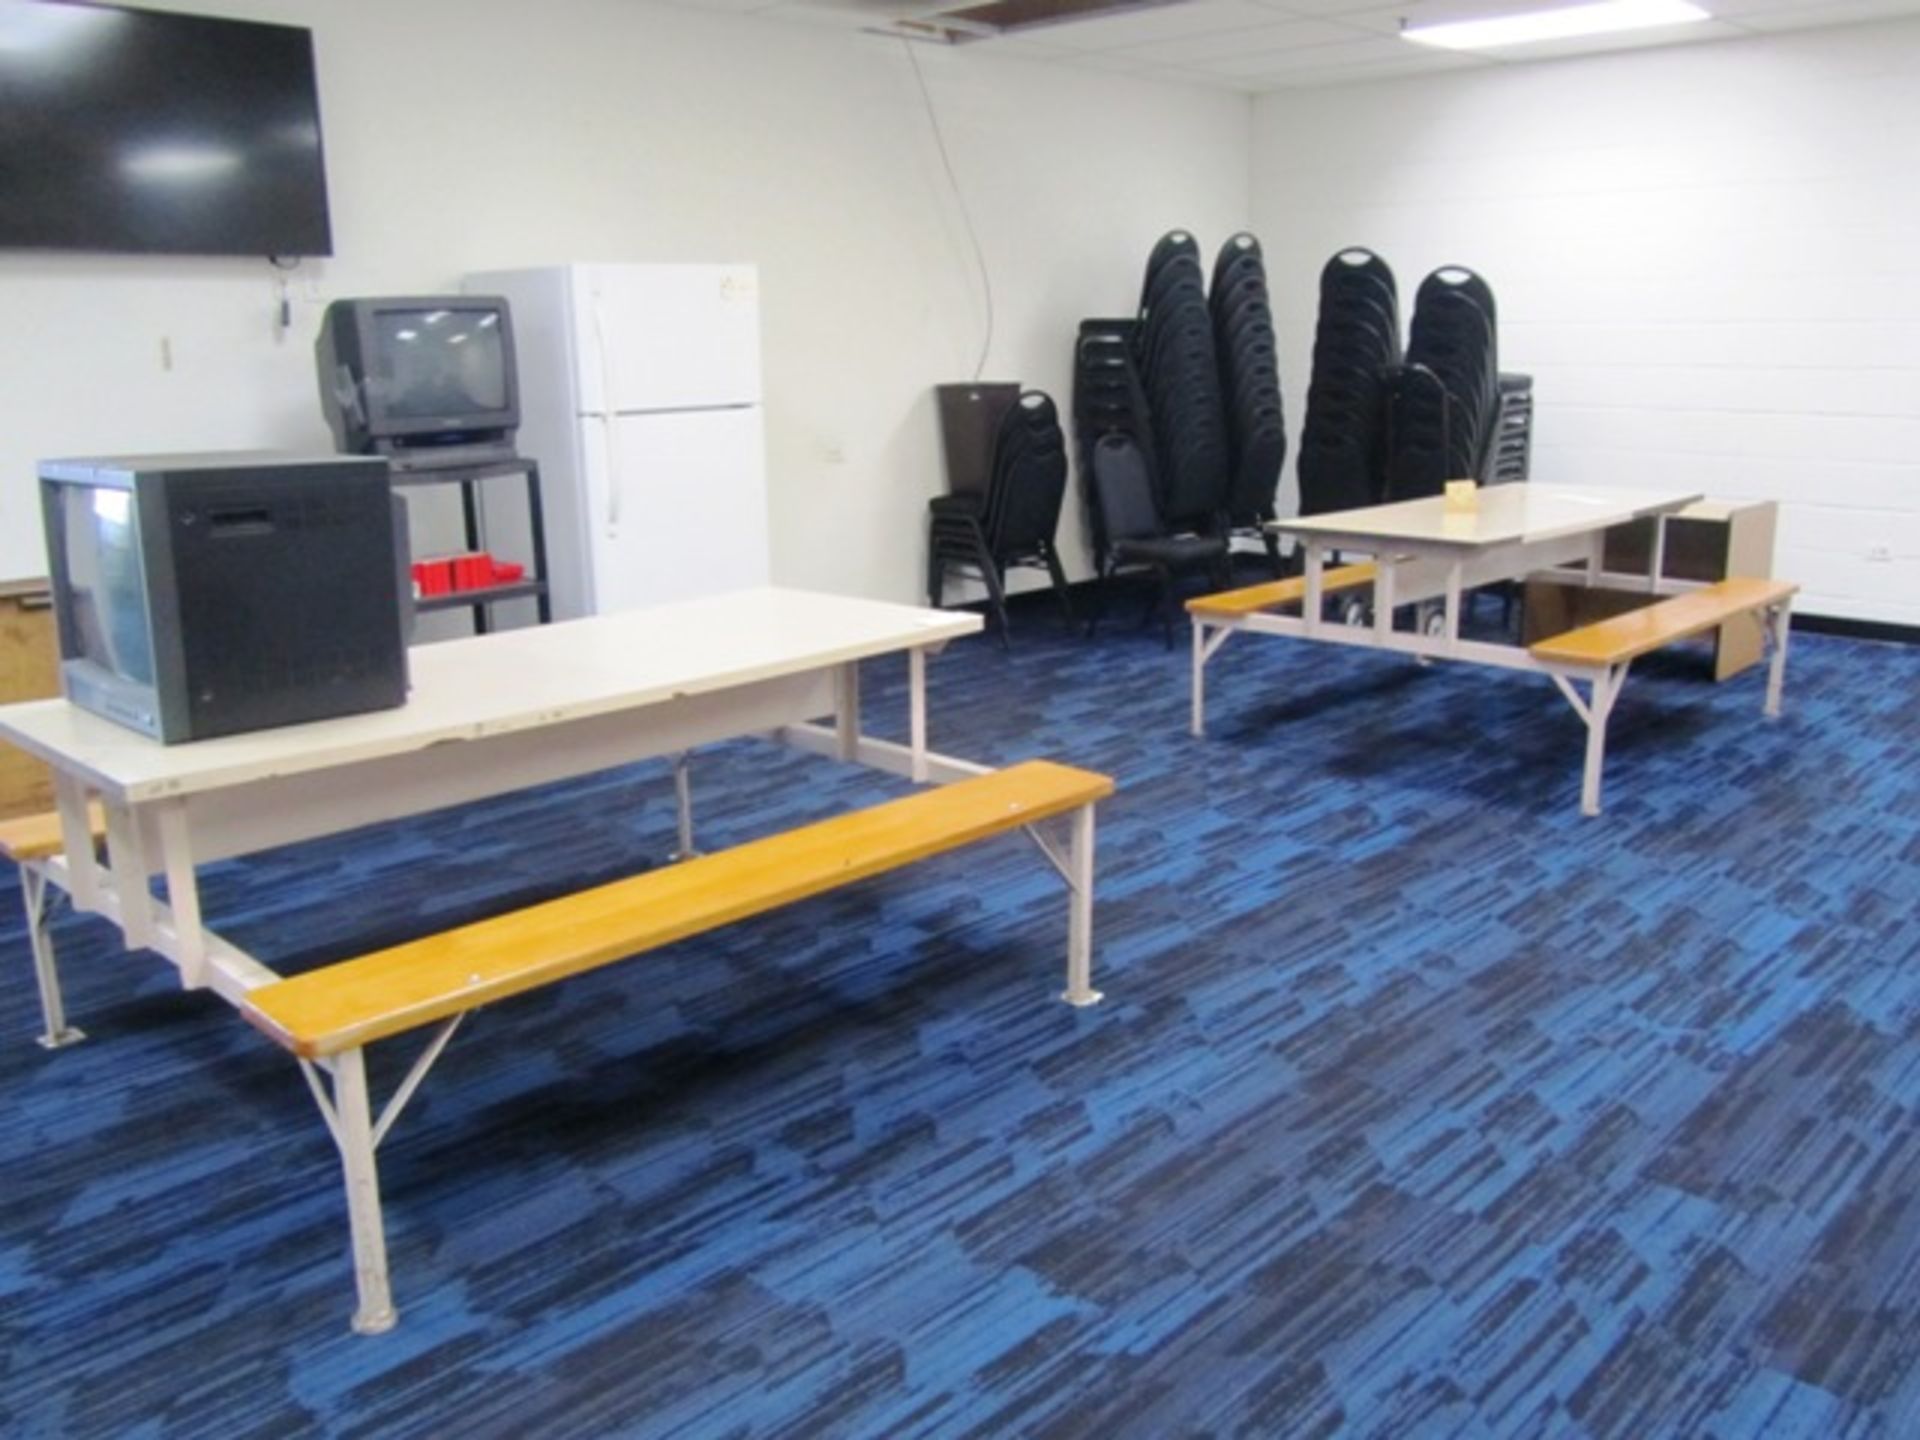 Balance of Breakroom consisting of Tables, Chairs (no tv, no defibrillator)